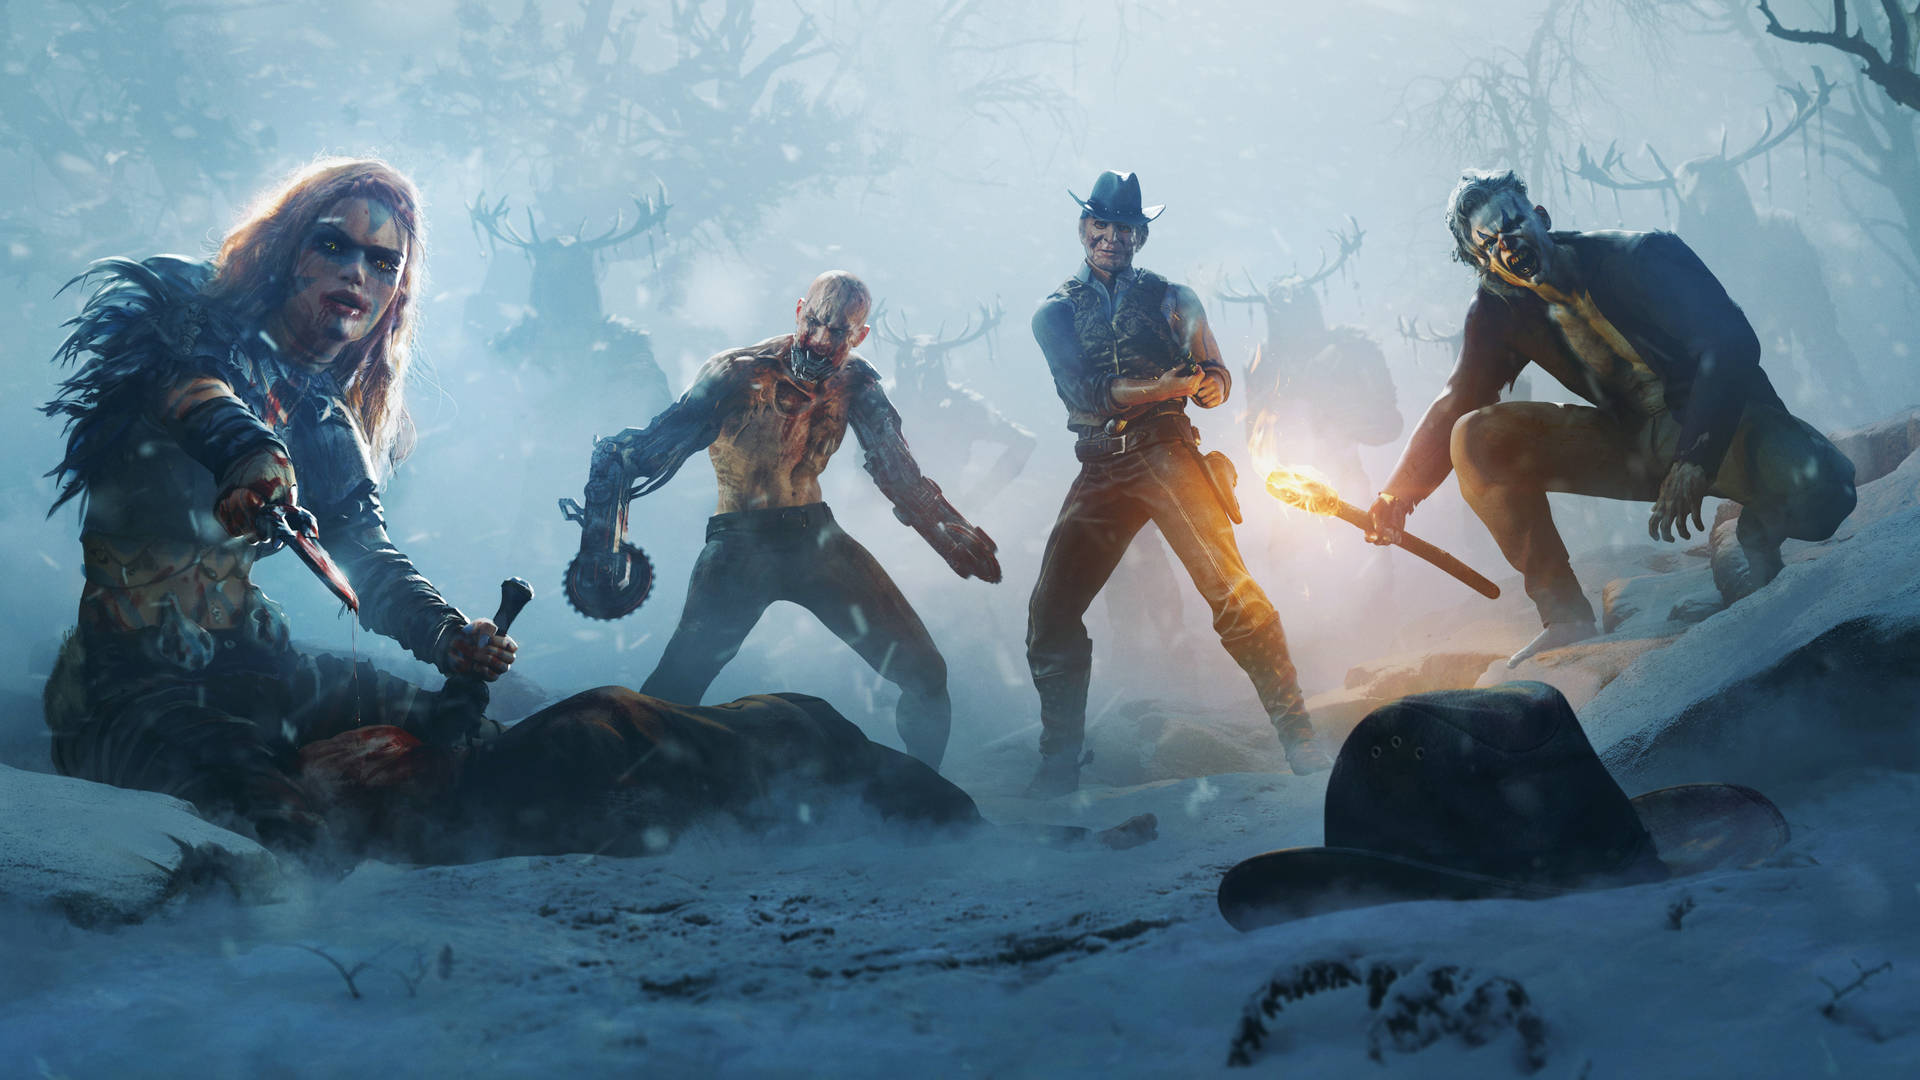 Wasteland Zombies In Snow